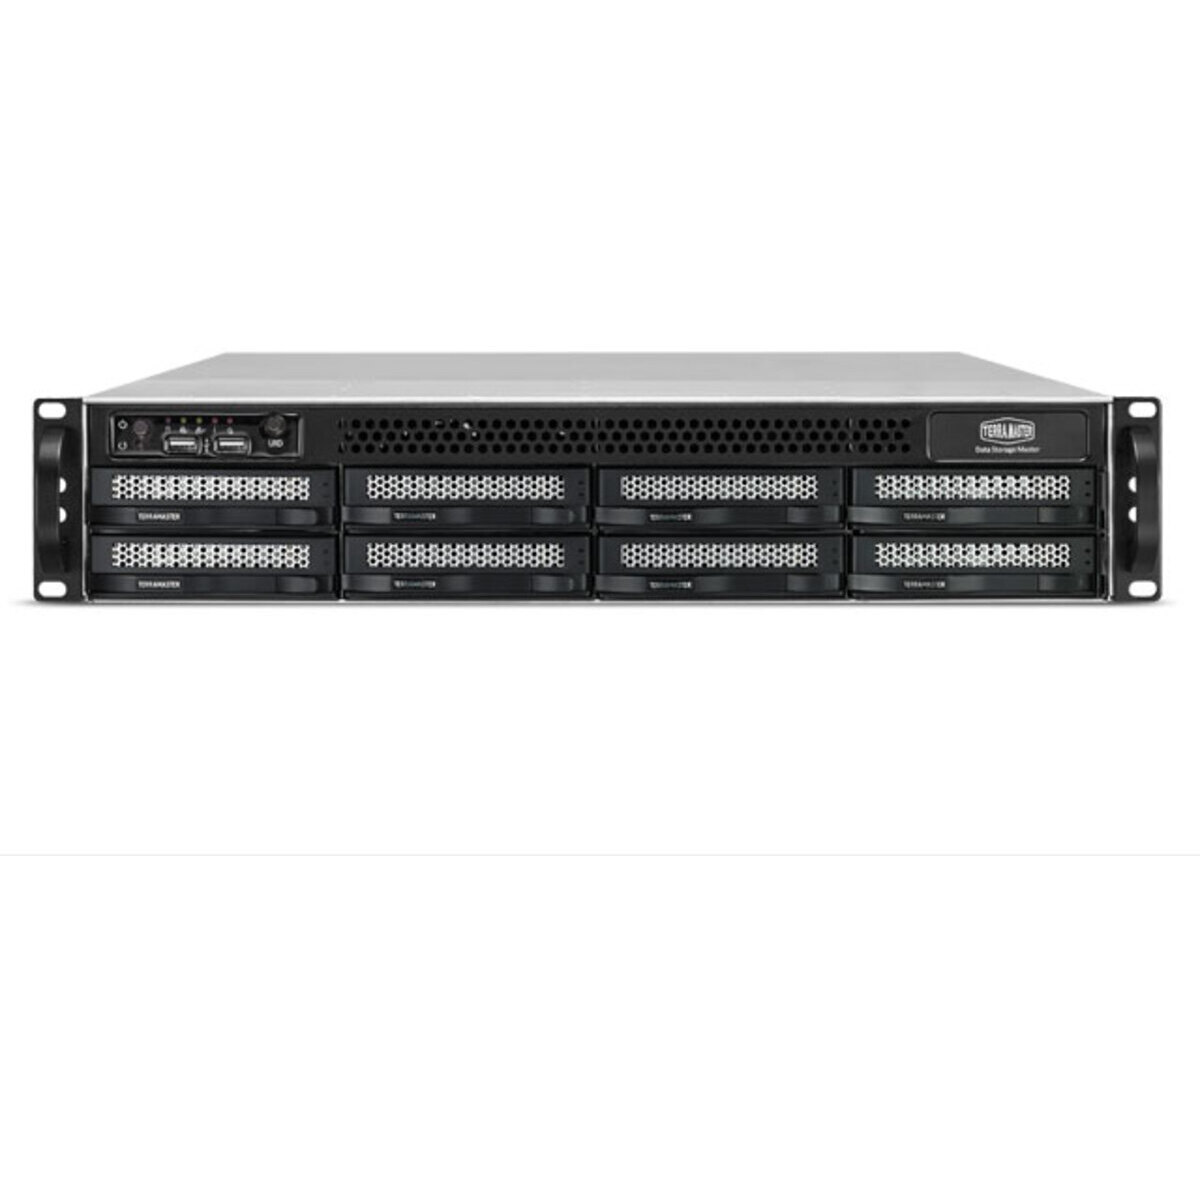 TerraMaster U8-522-9400 4tb 8-Bay RackMount Large Business / Enterprise NAS - Network Attached Storage Device 8x500gb Crucial MX500 CT500MX500SSD1 2.5 560/510MB/s SATA 6Gb/s SSD CONSUMER Class Drives Installed - Burn-In Tested U8-522-9400